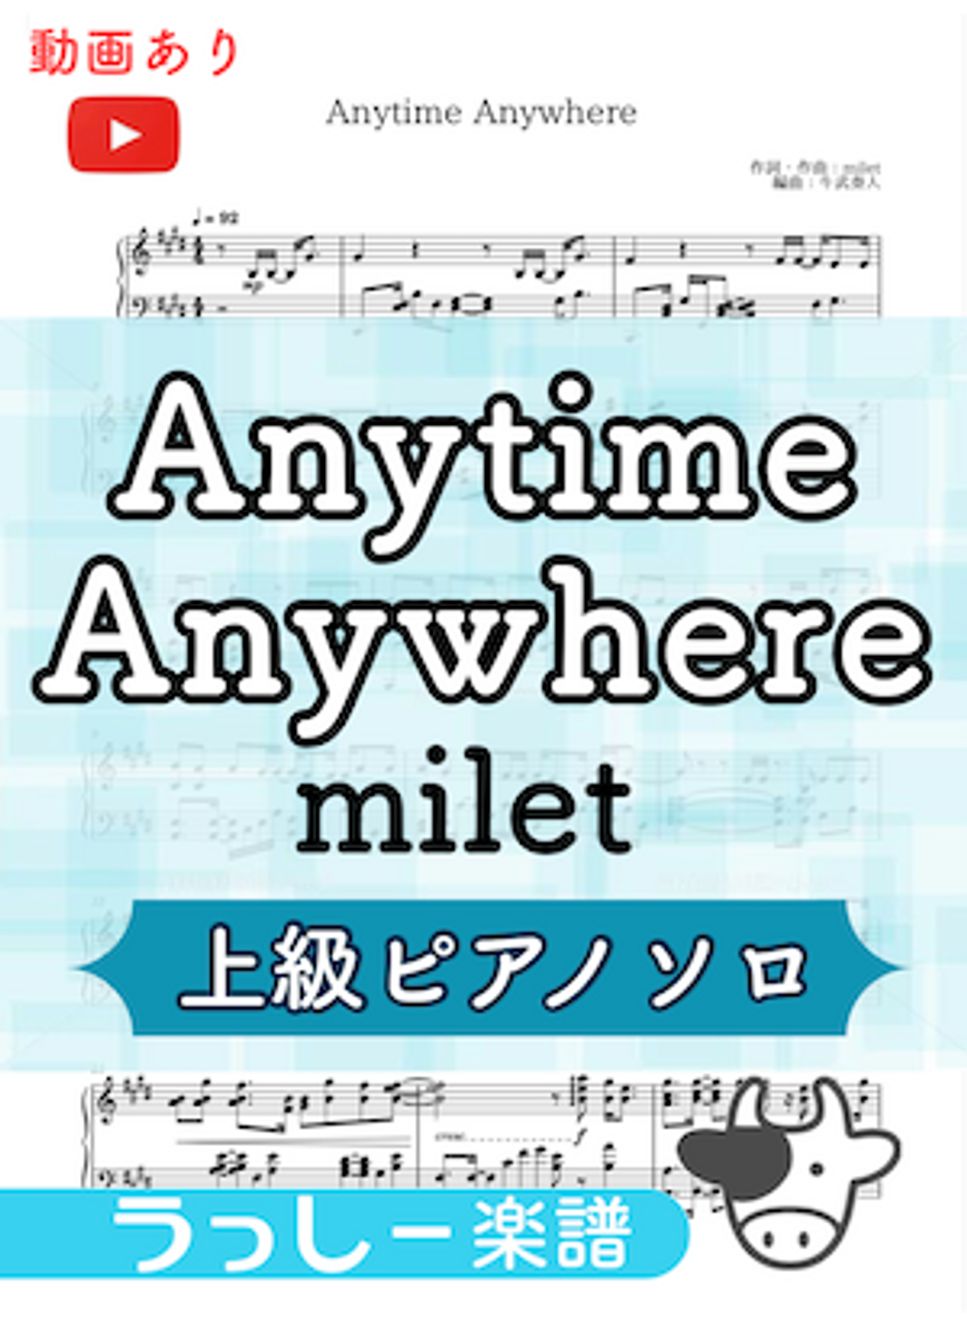 anytime anywhere by 牛武奏人【ピアノソロ&ボーカルアレンジ】